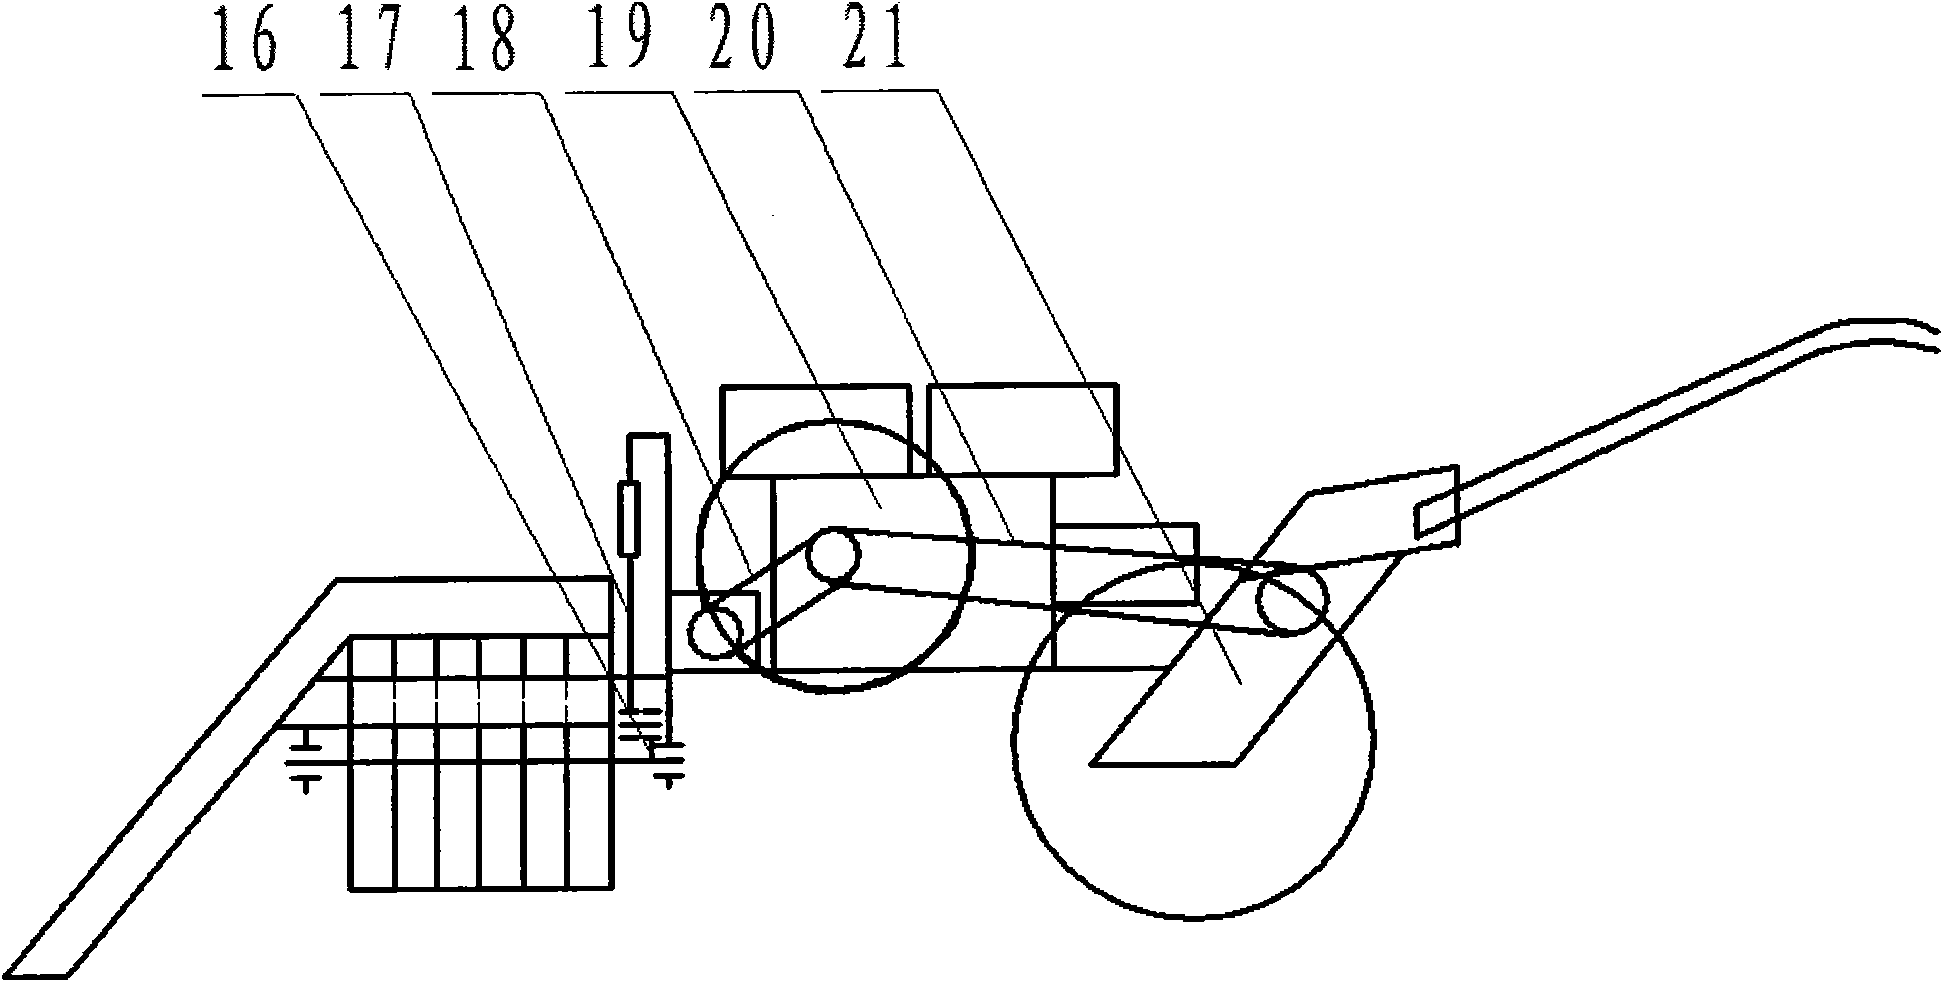 Front potato harvester for walking tractor